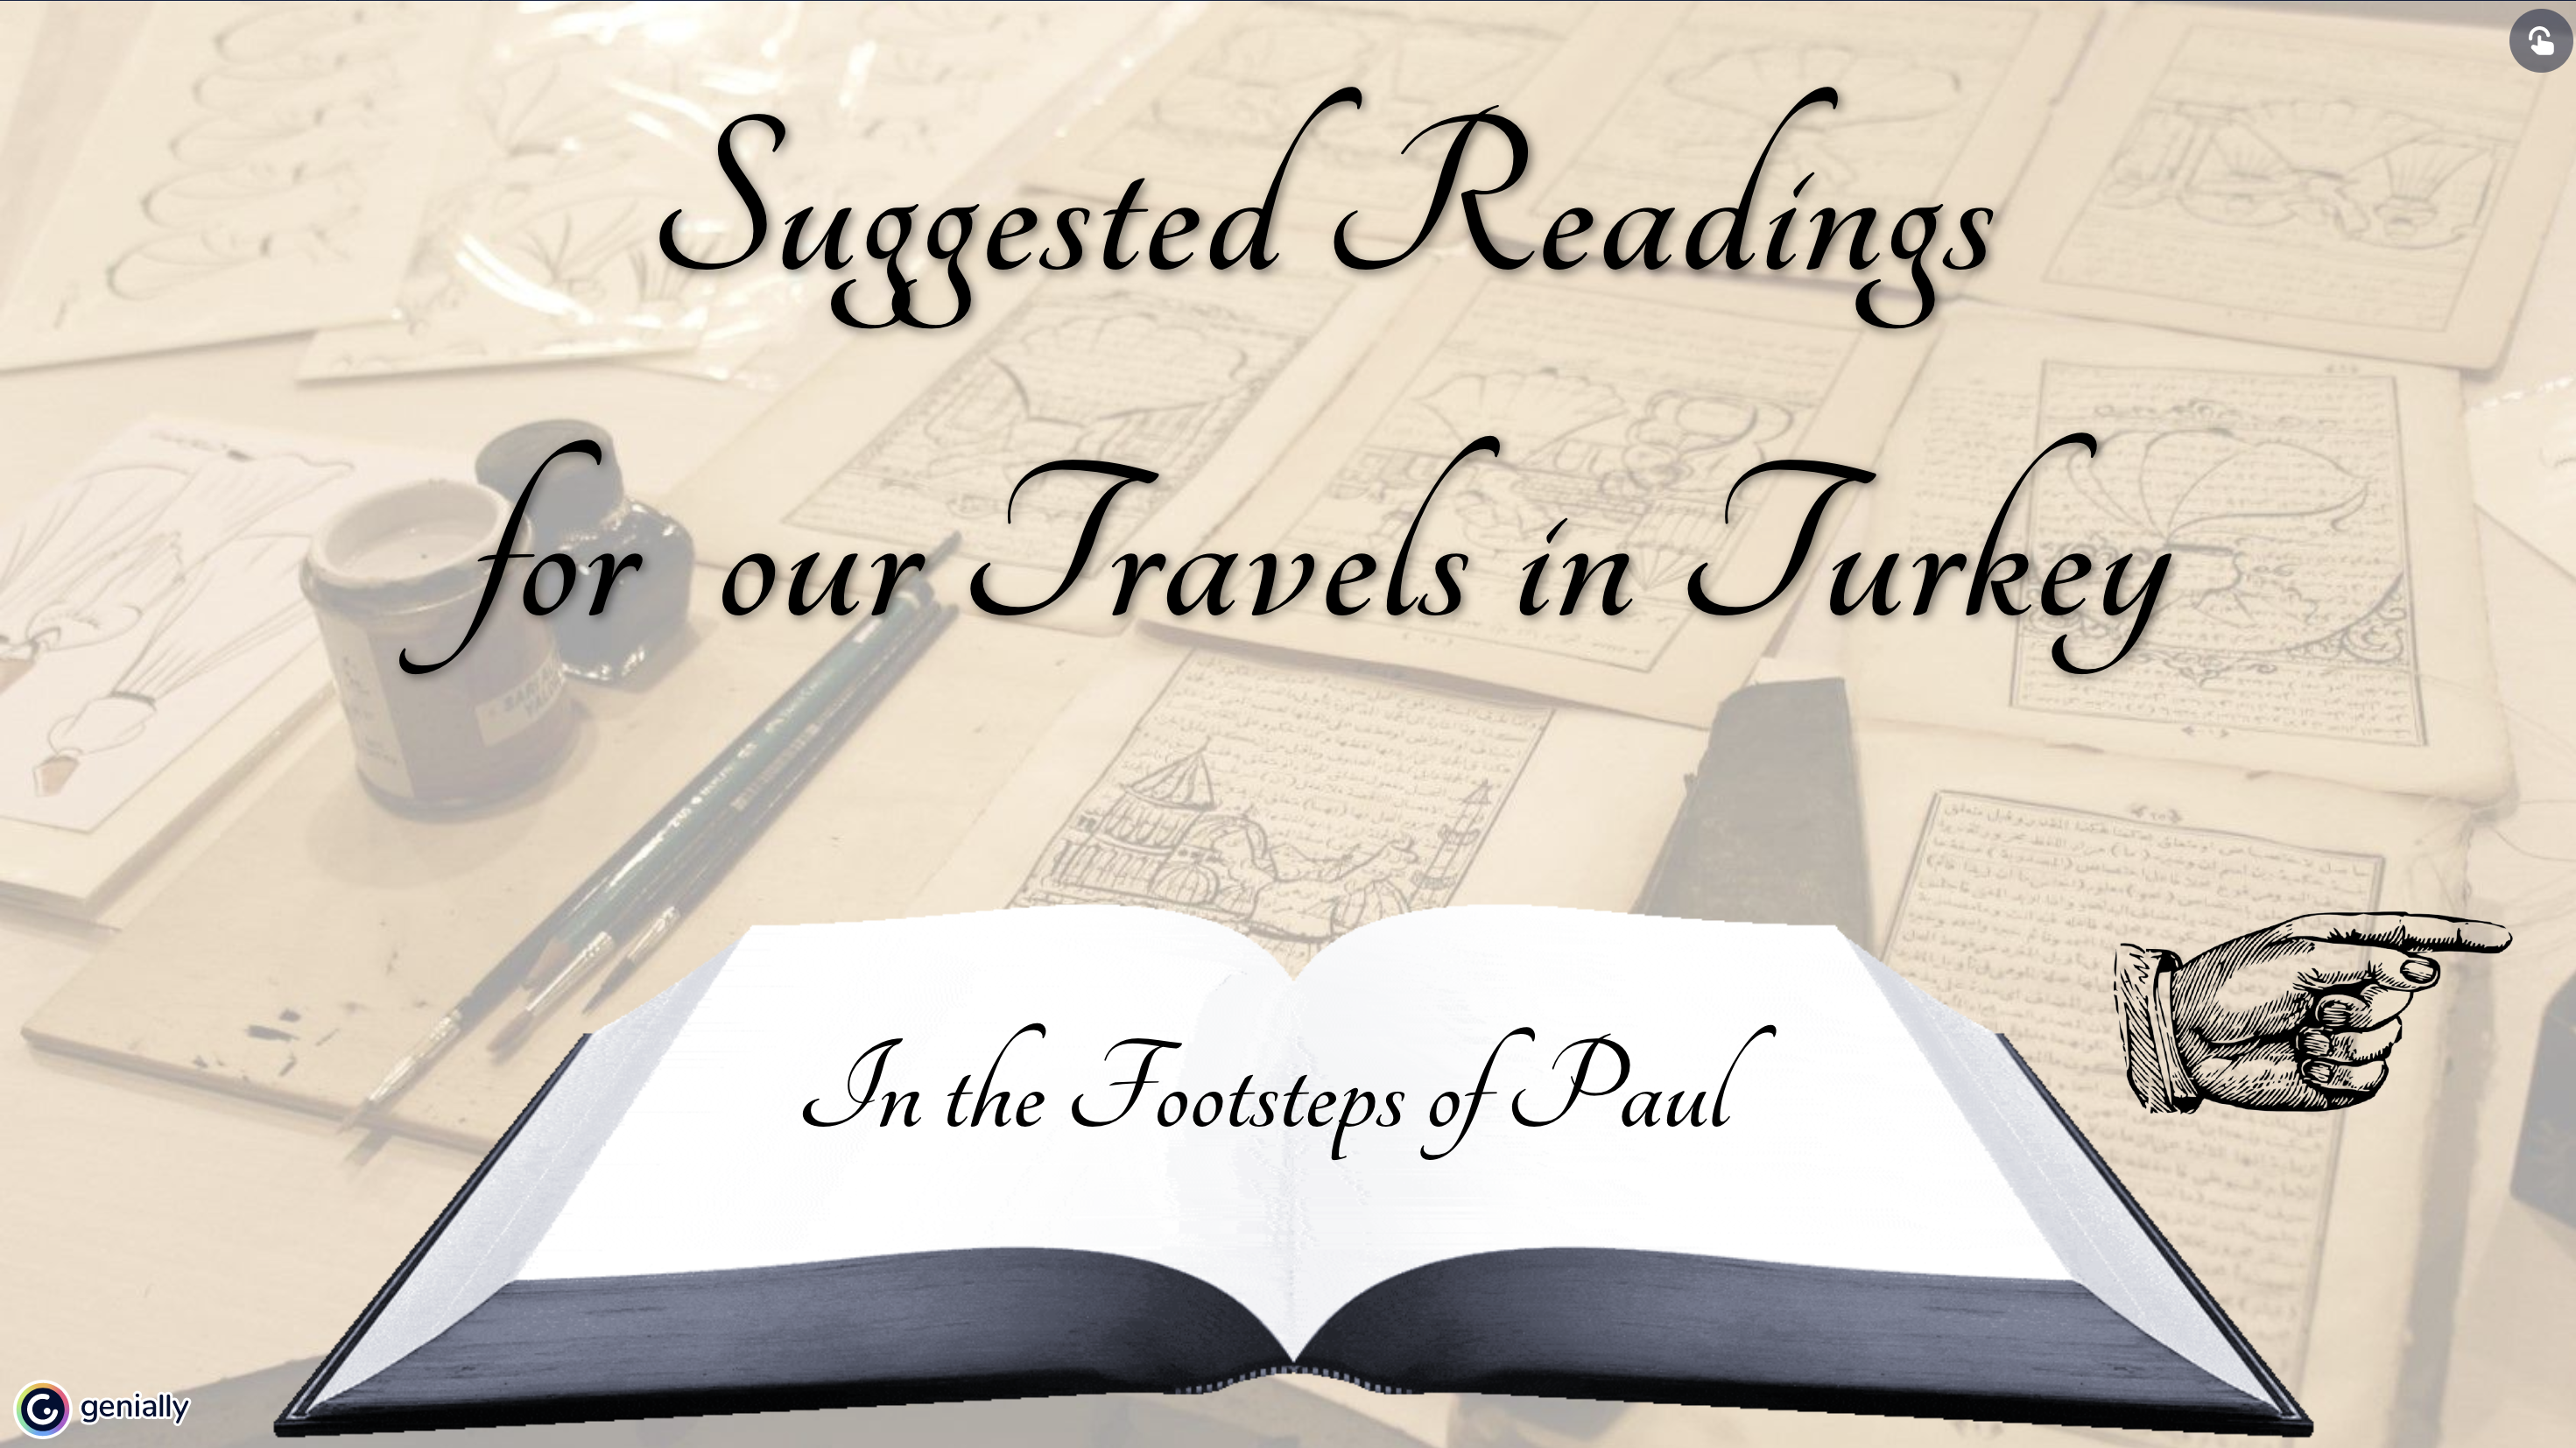 Suggested Reading List for "In the Footsteps of Paul"